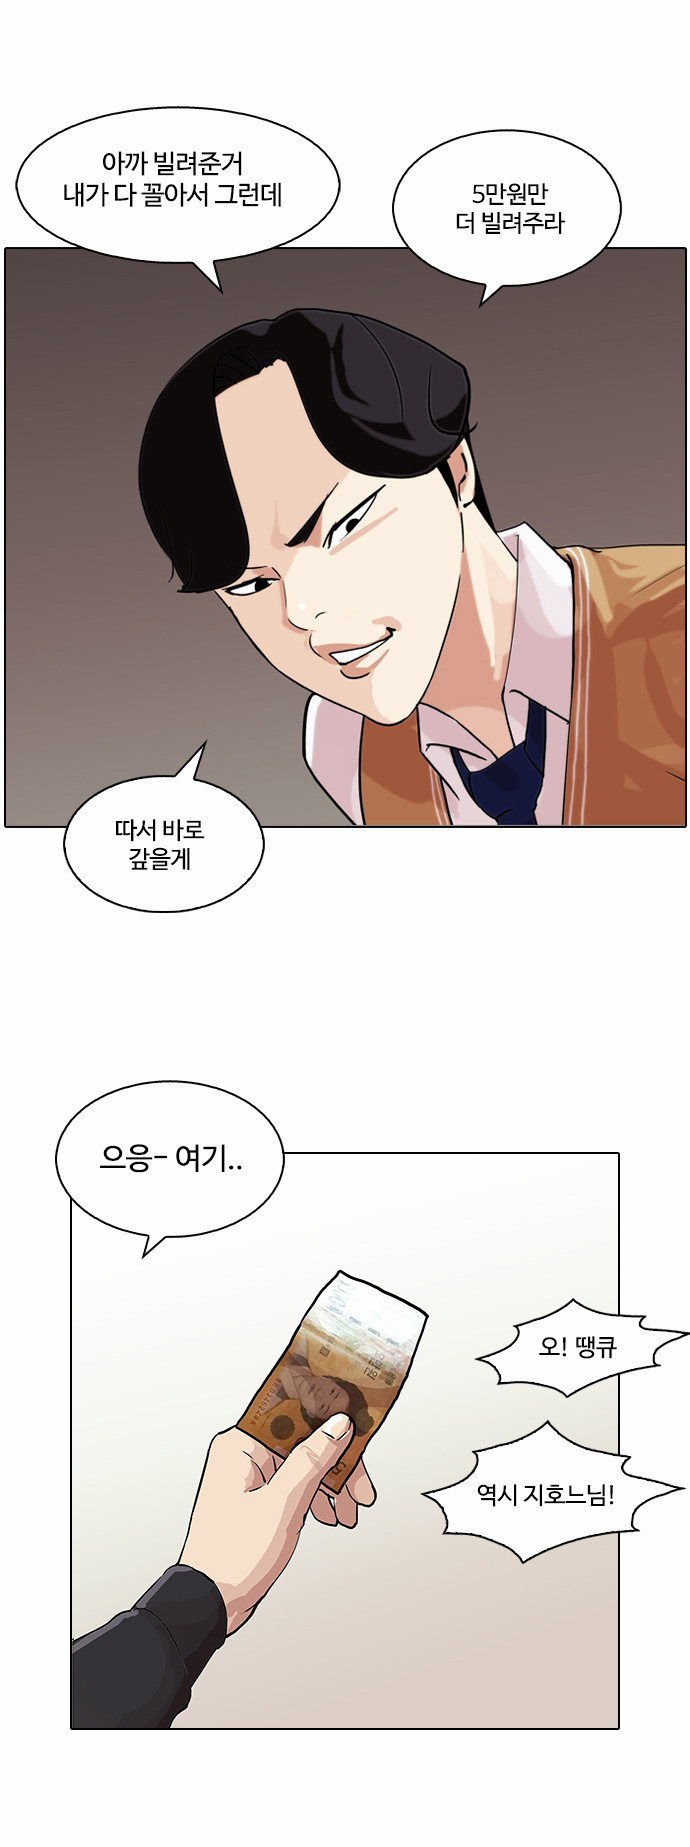 Lookism - Chapter 83 - Page 4